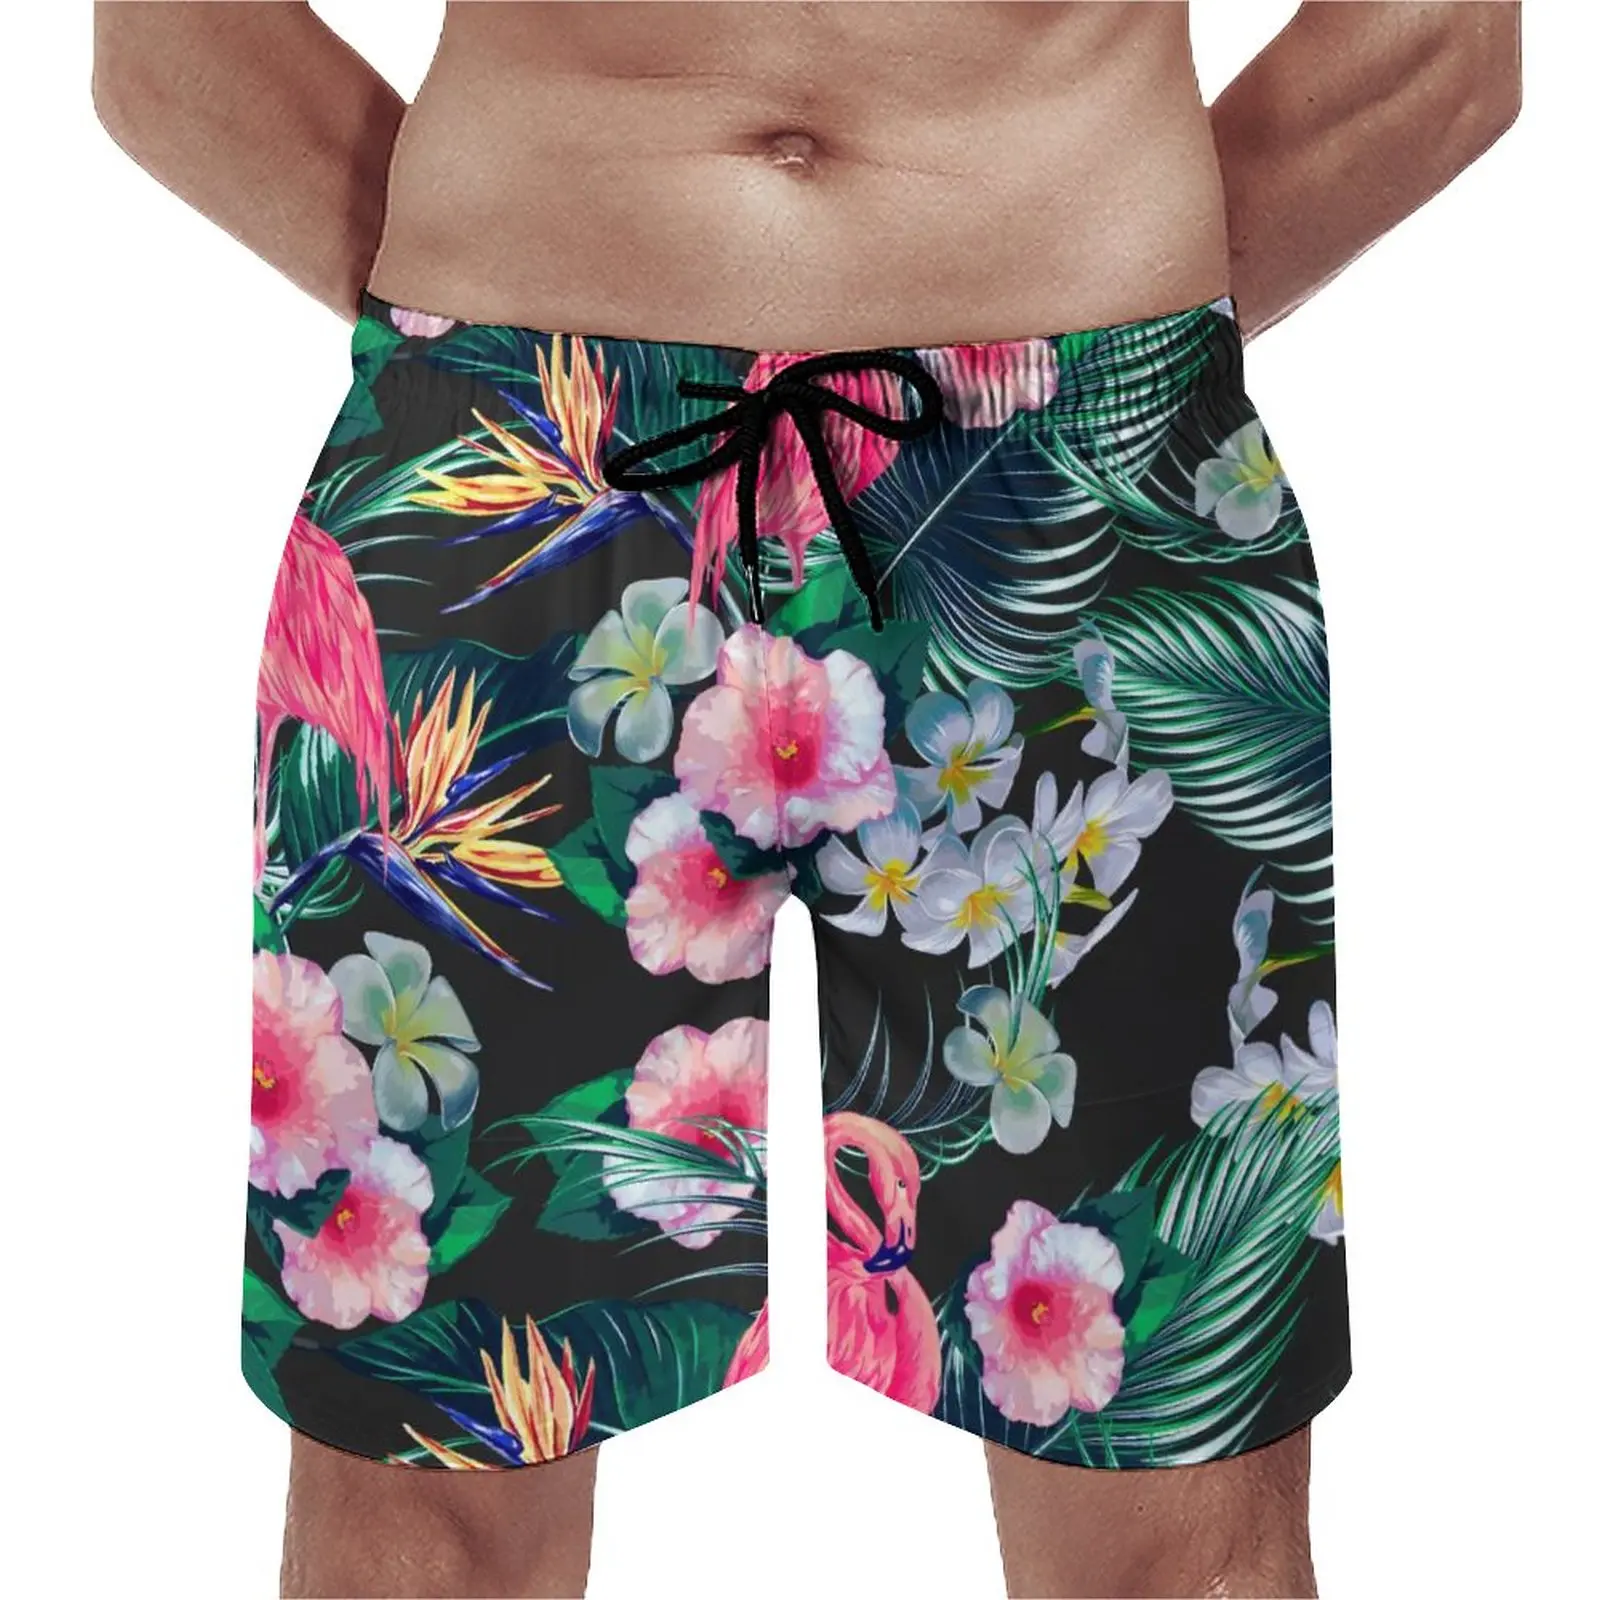 Forest Palm Leaves Board Shorts Floral and Flamingo Print Beach Short Pants Hot Man Cute Printing Swimming Trunks Plus Size 3XL